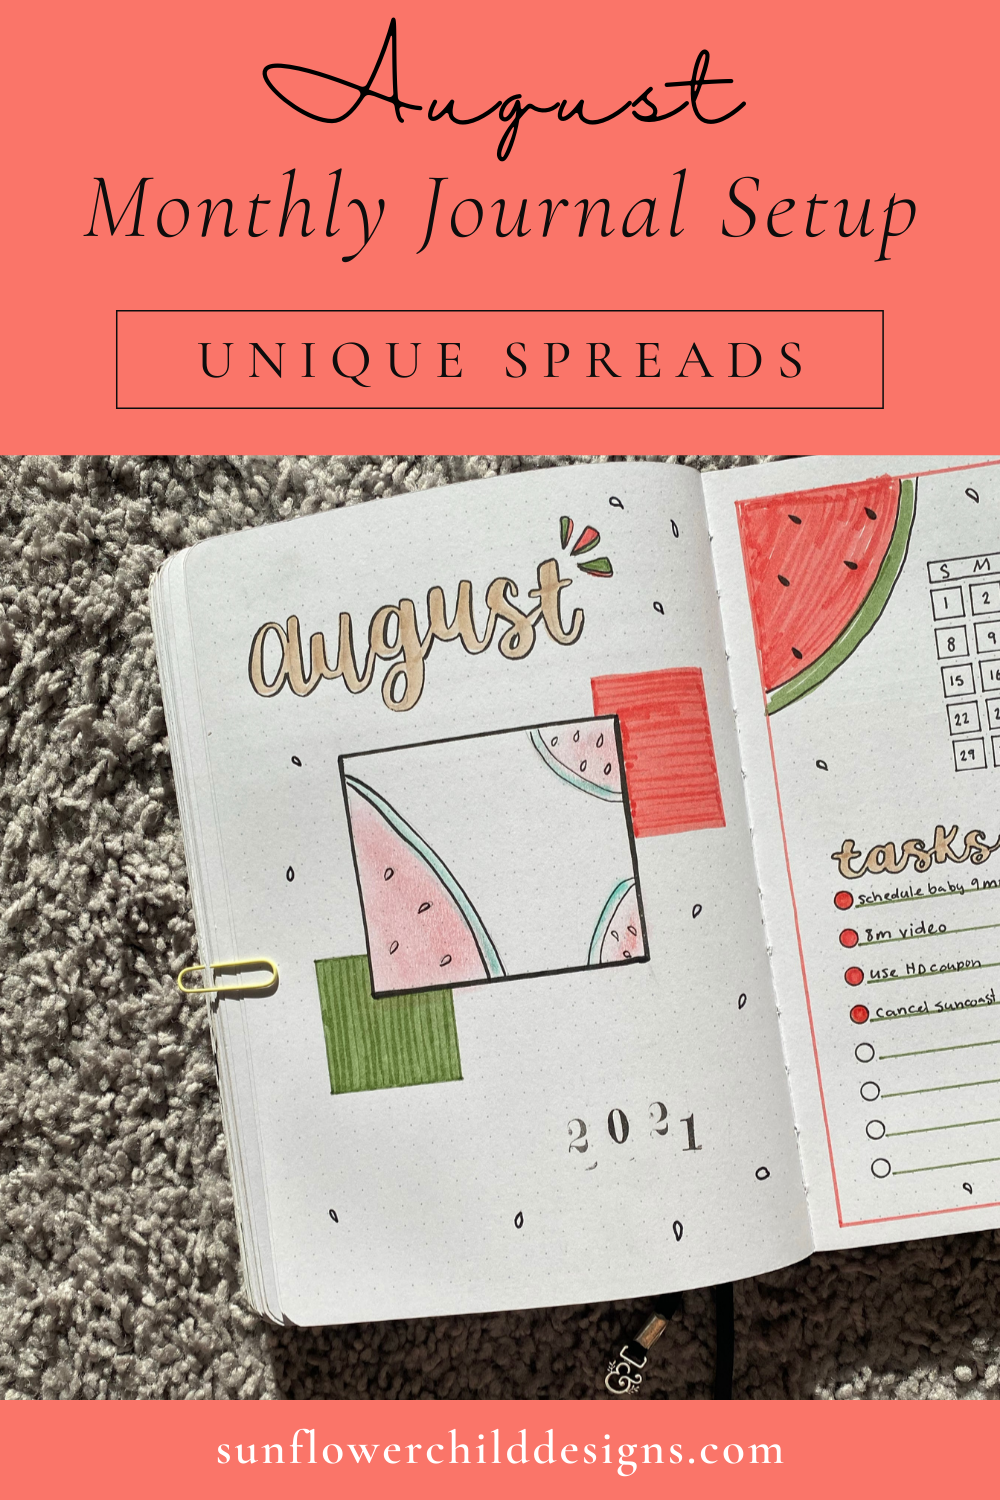 get creative with bullet journaling, by LD - yooou!